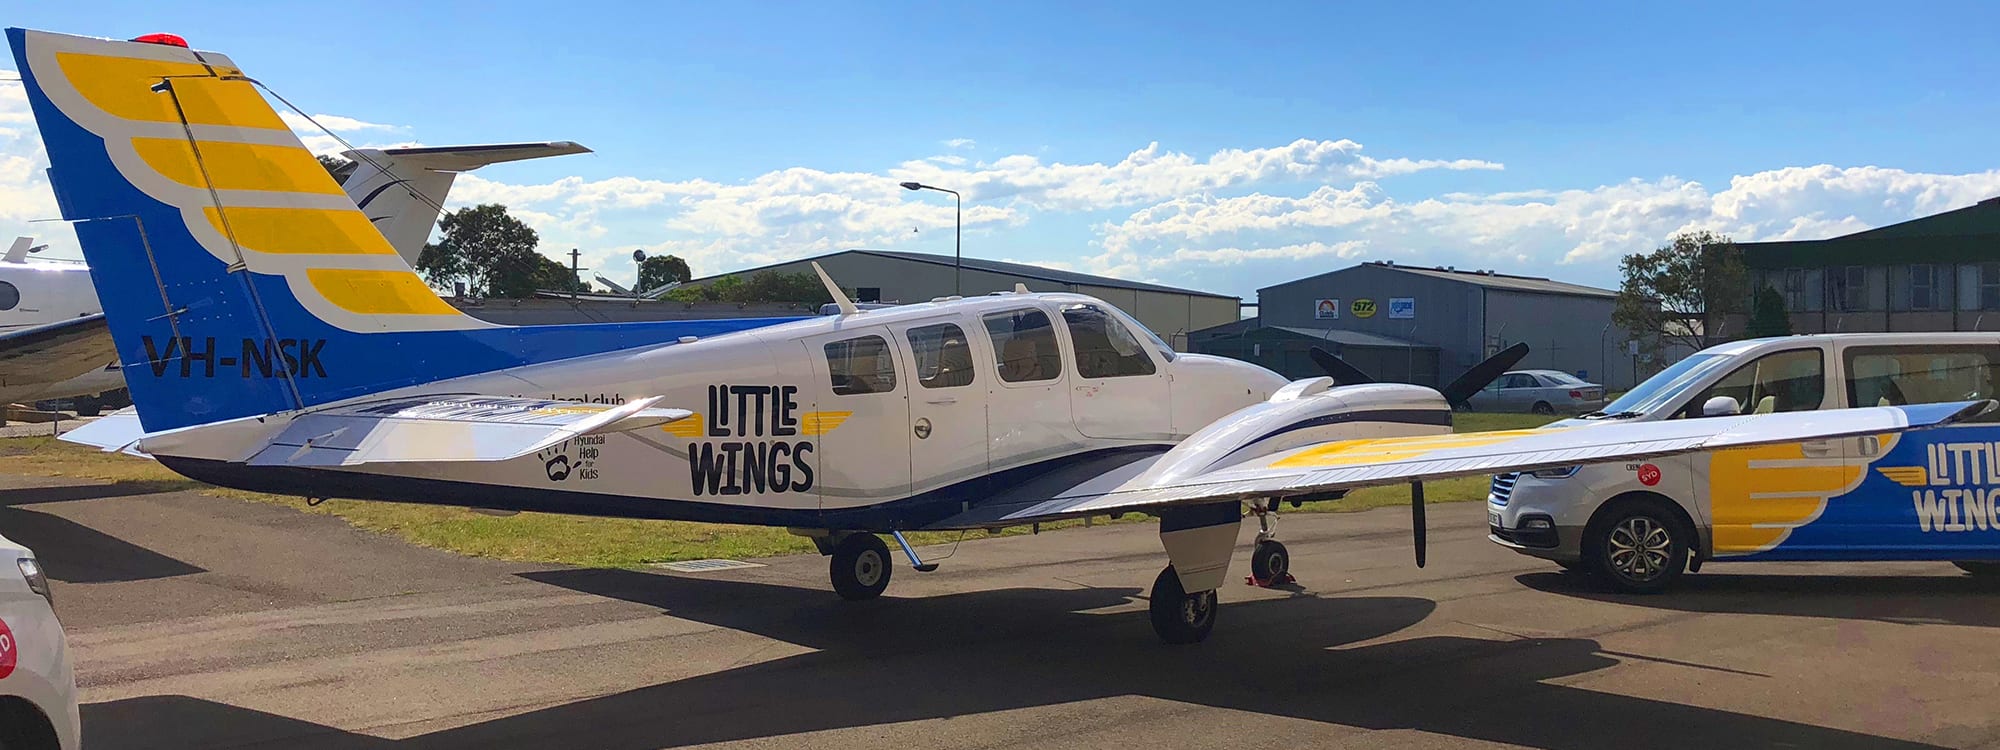 Southpac helps Little Wings soar safely and provides free flight & ground transport services for sick children in rural & regional NSW.